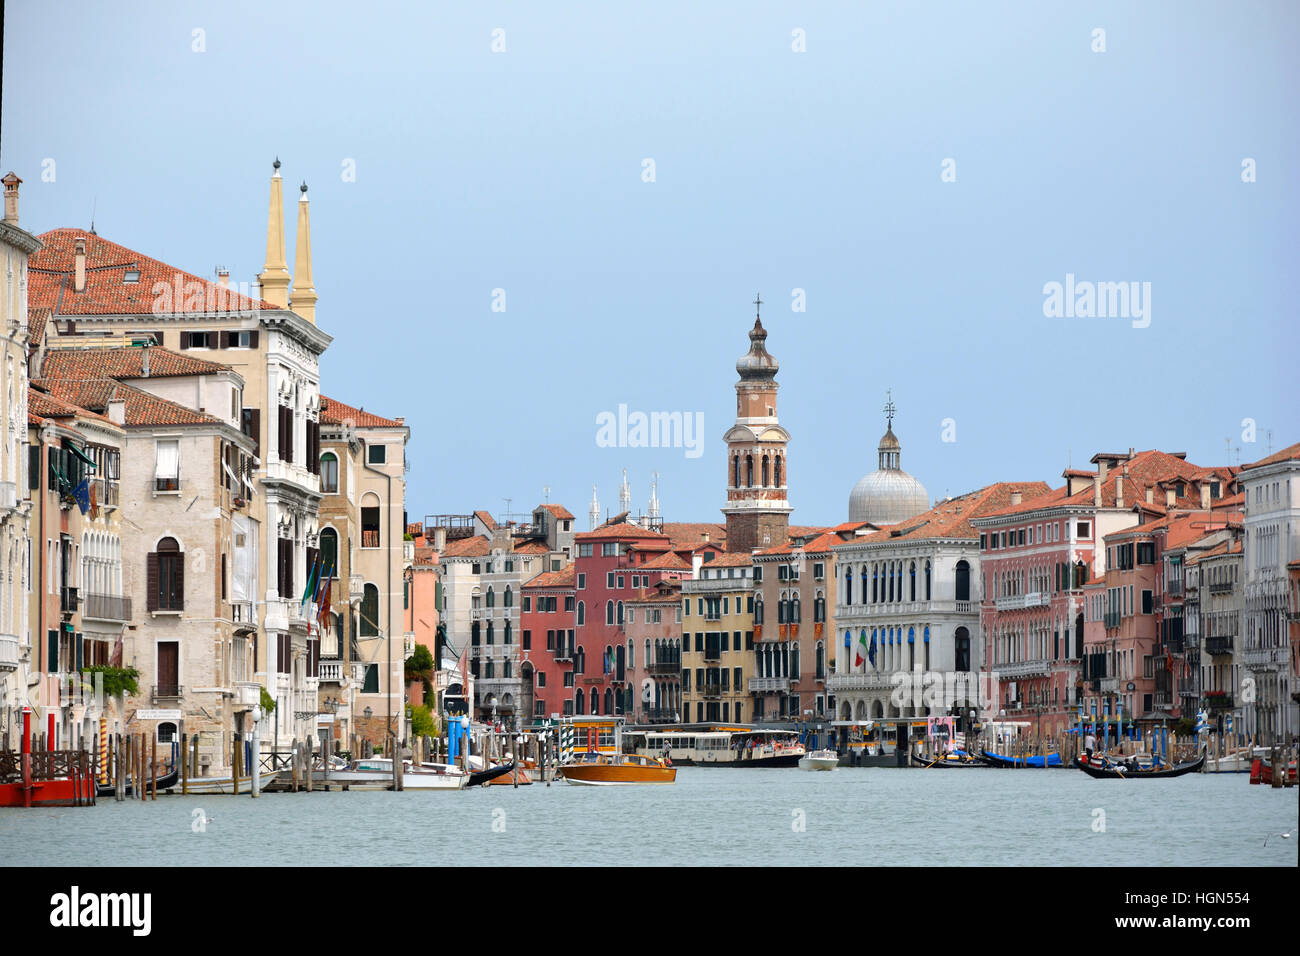 Historical Palaces at the Grand Canal of Venice in Italy. Stock Photo